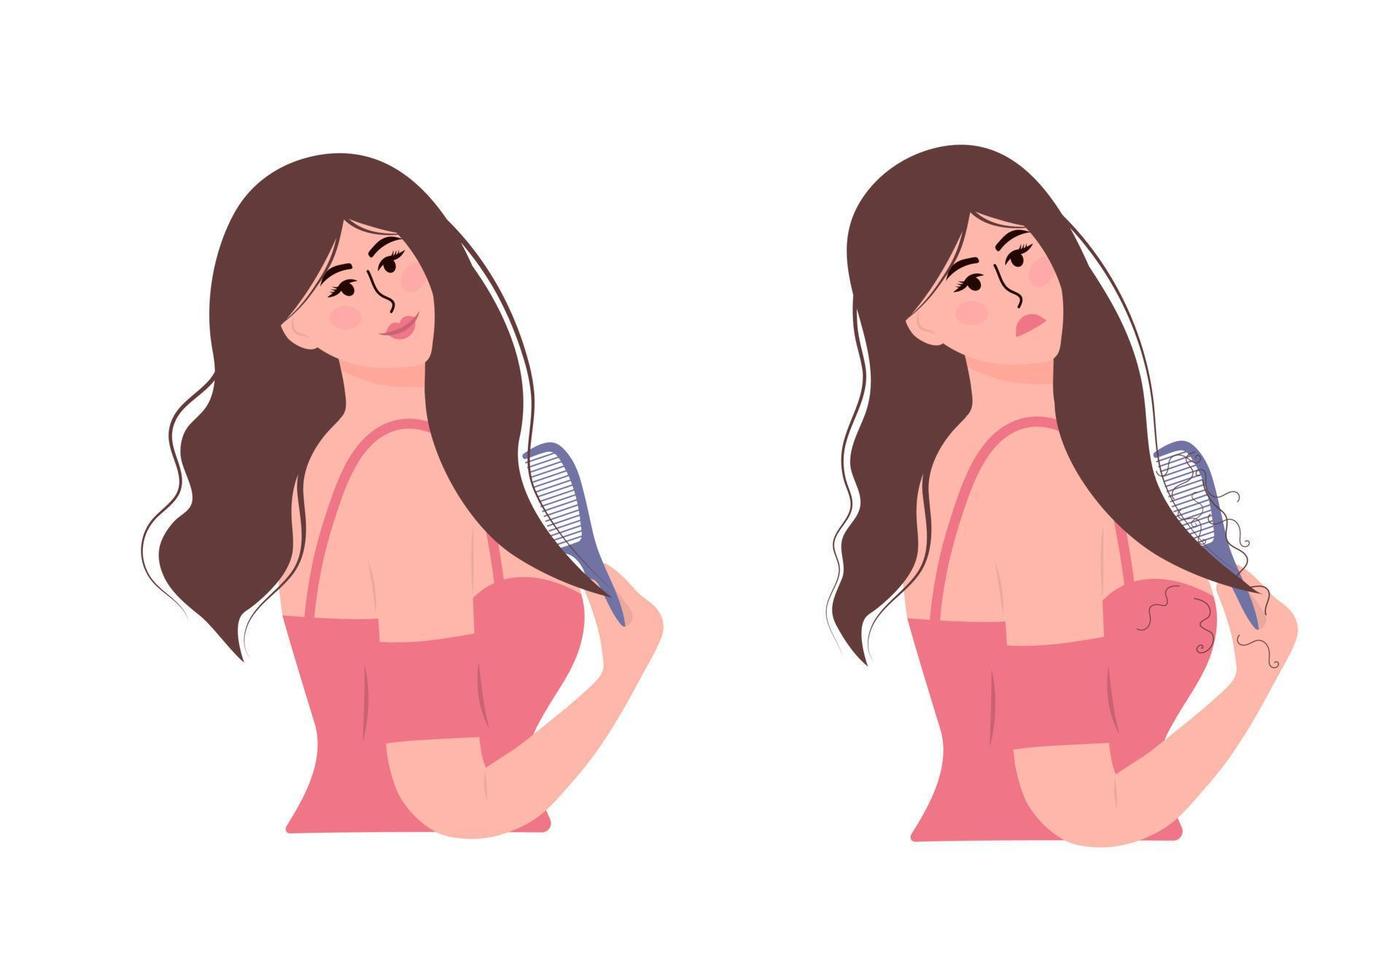 Beautiful woman is combing her hair and suffering from the hair loss. Before and after. Hair care, alopecia, hair problems, baldness concept. vector